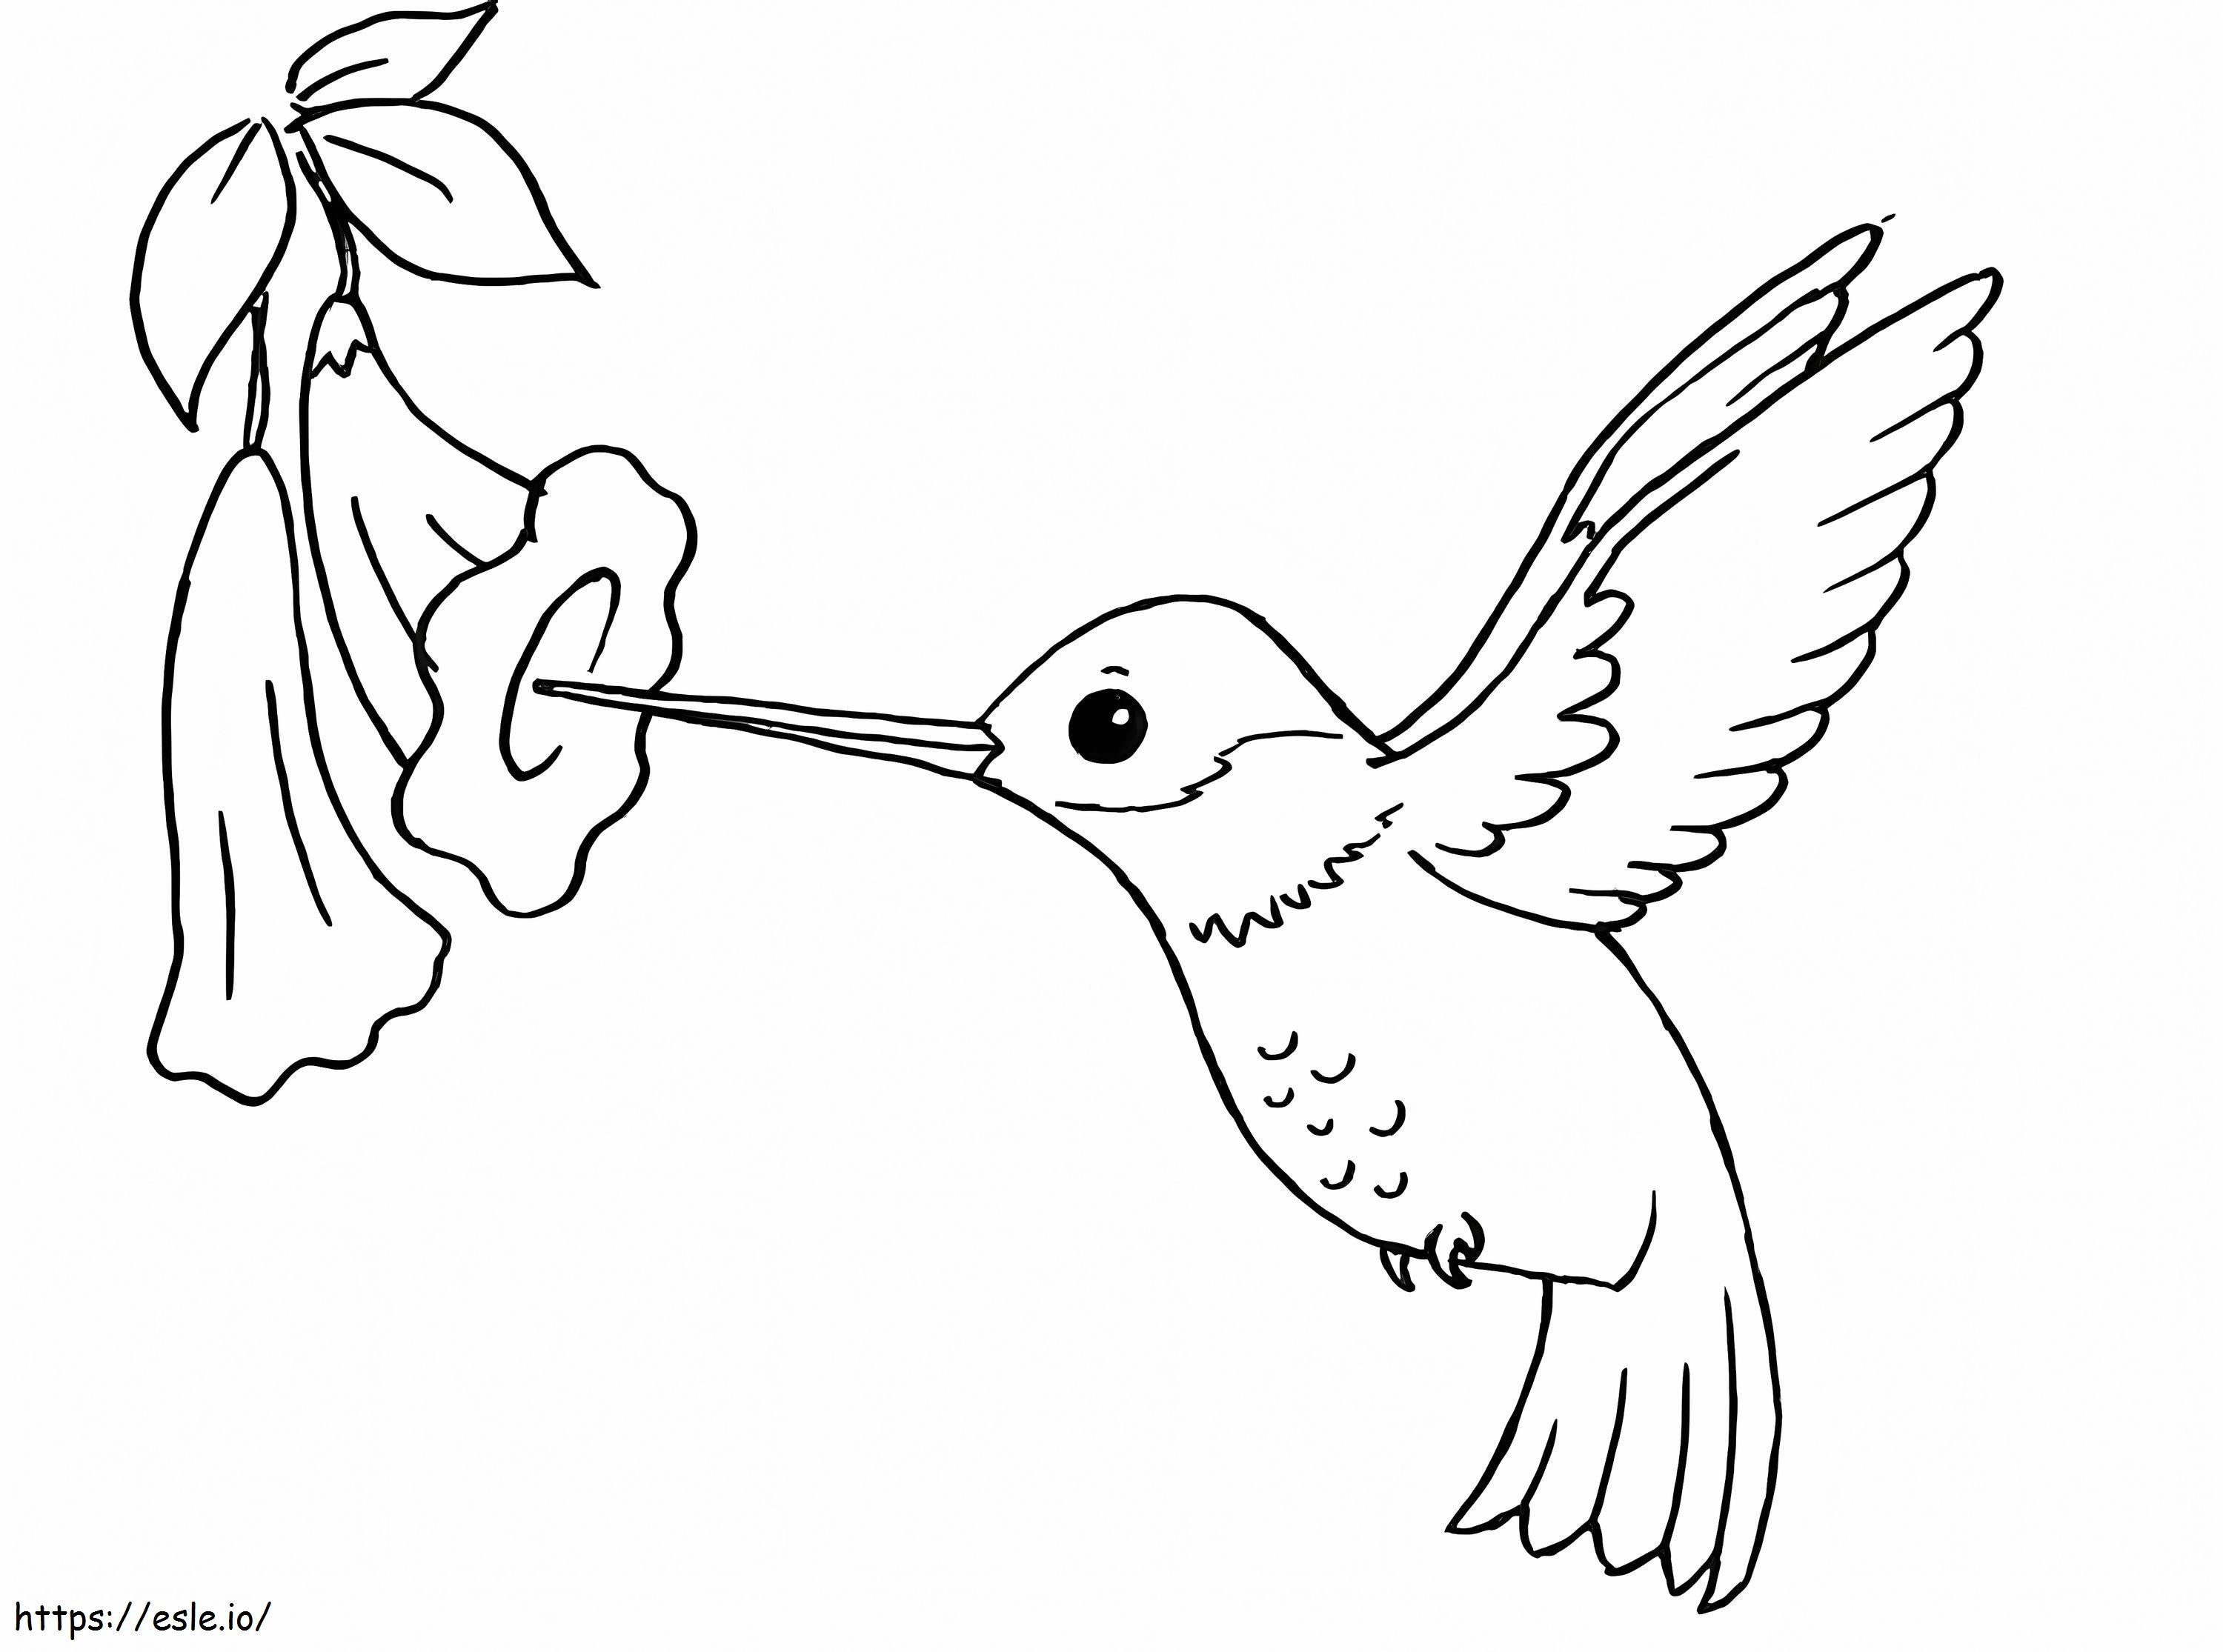 Normal Hummingbird With Flower coloring page